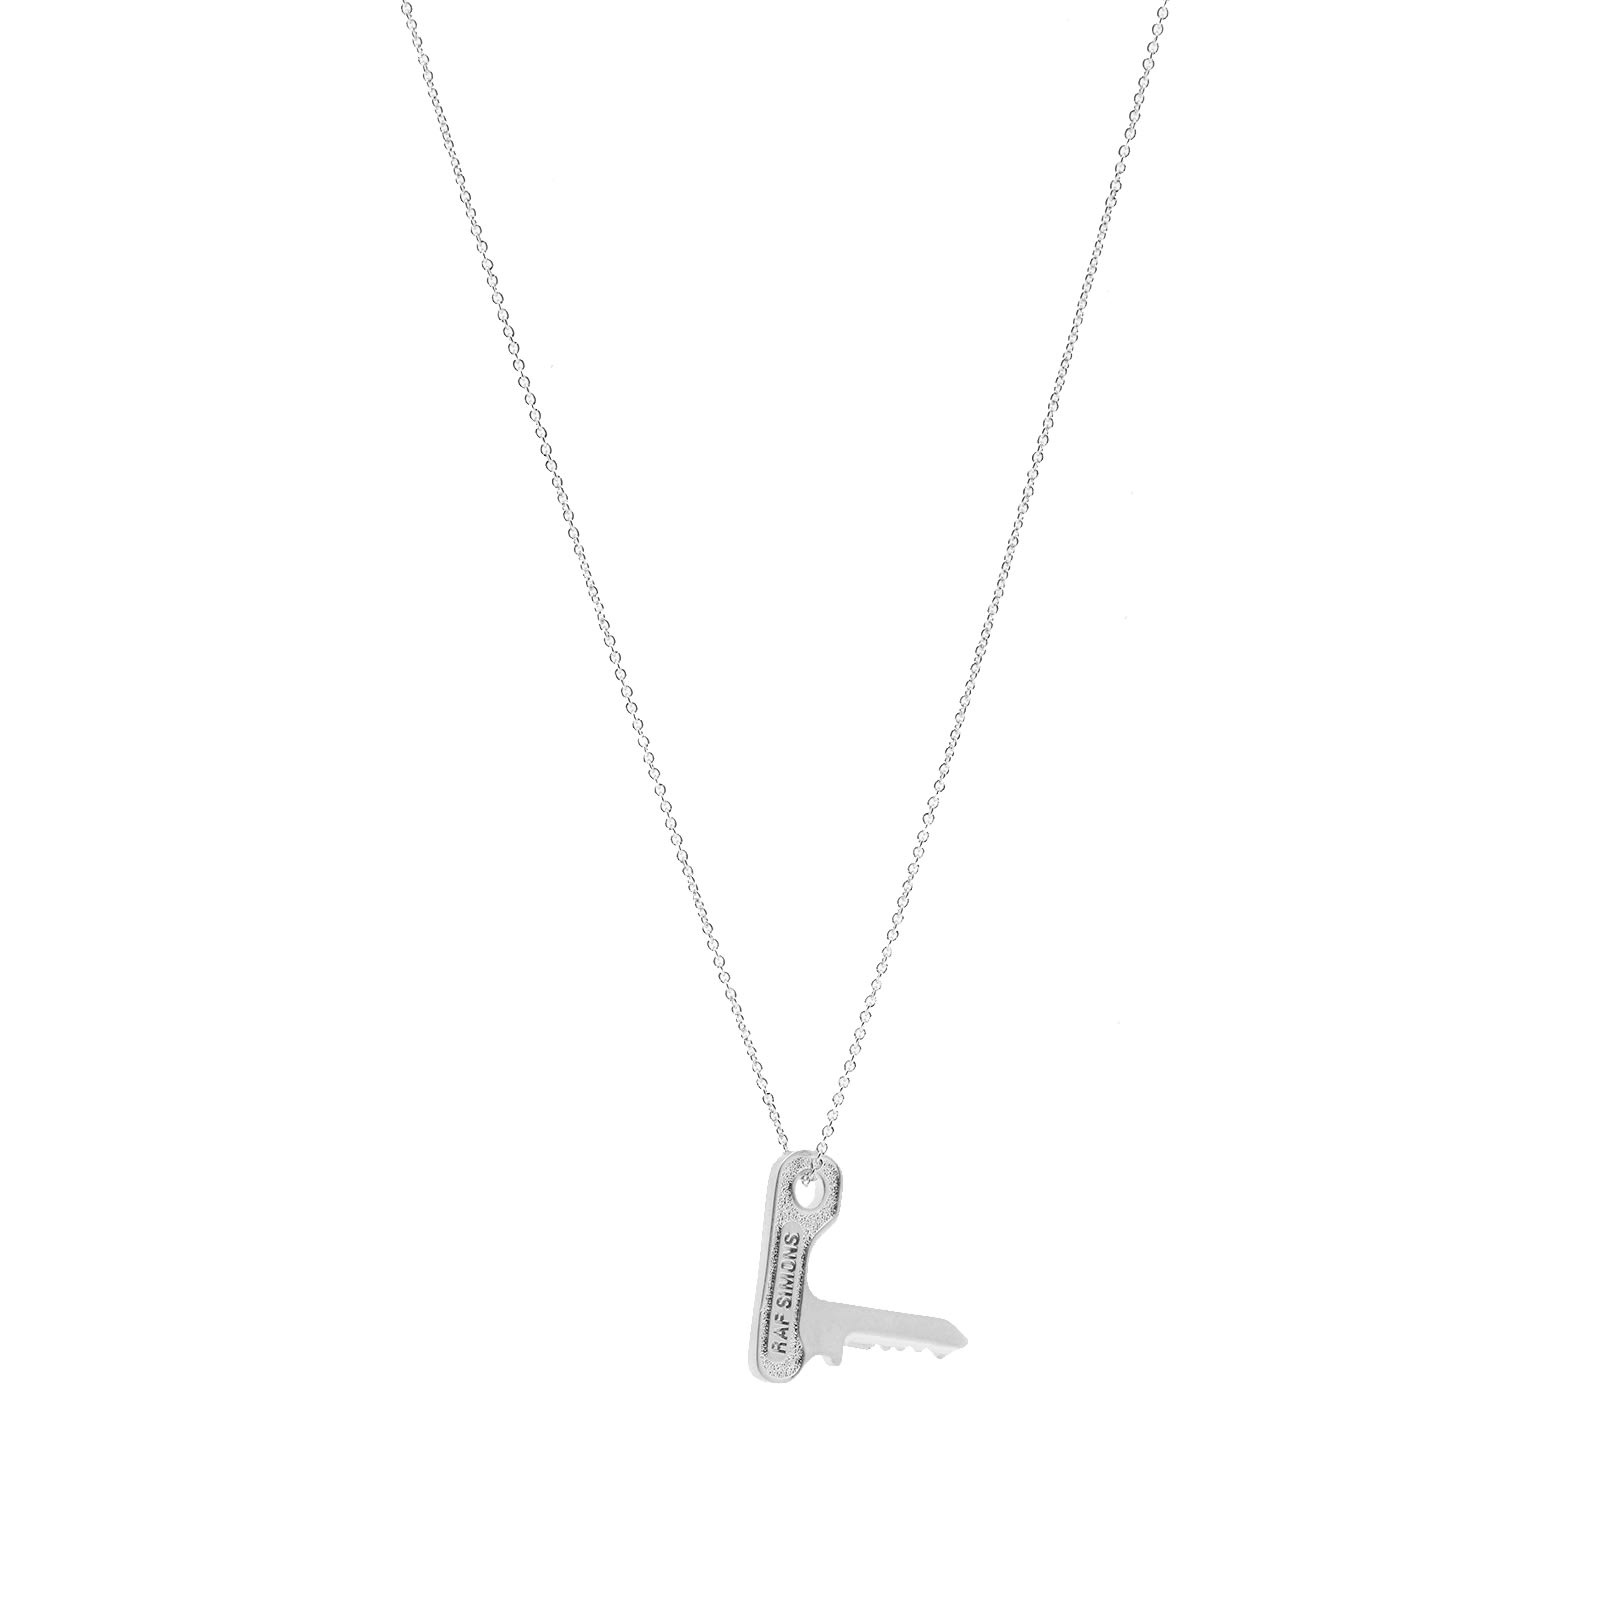 Raf Simons Small Key On Hanger Necklace - 1